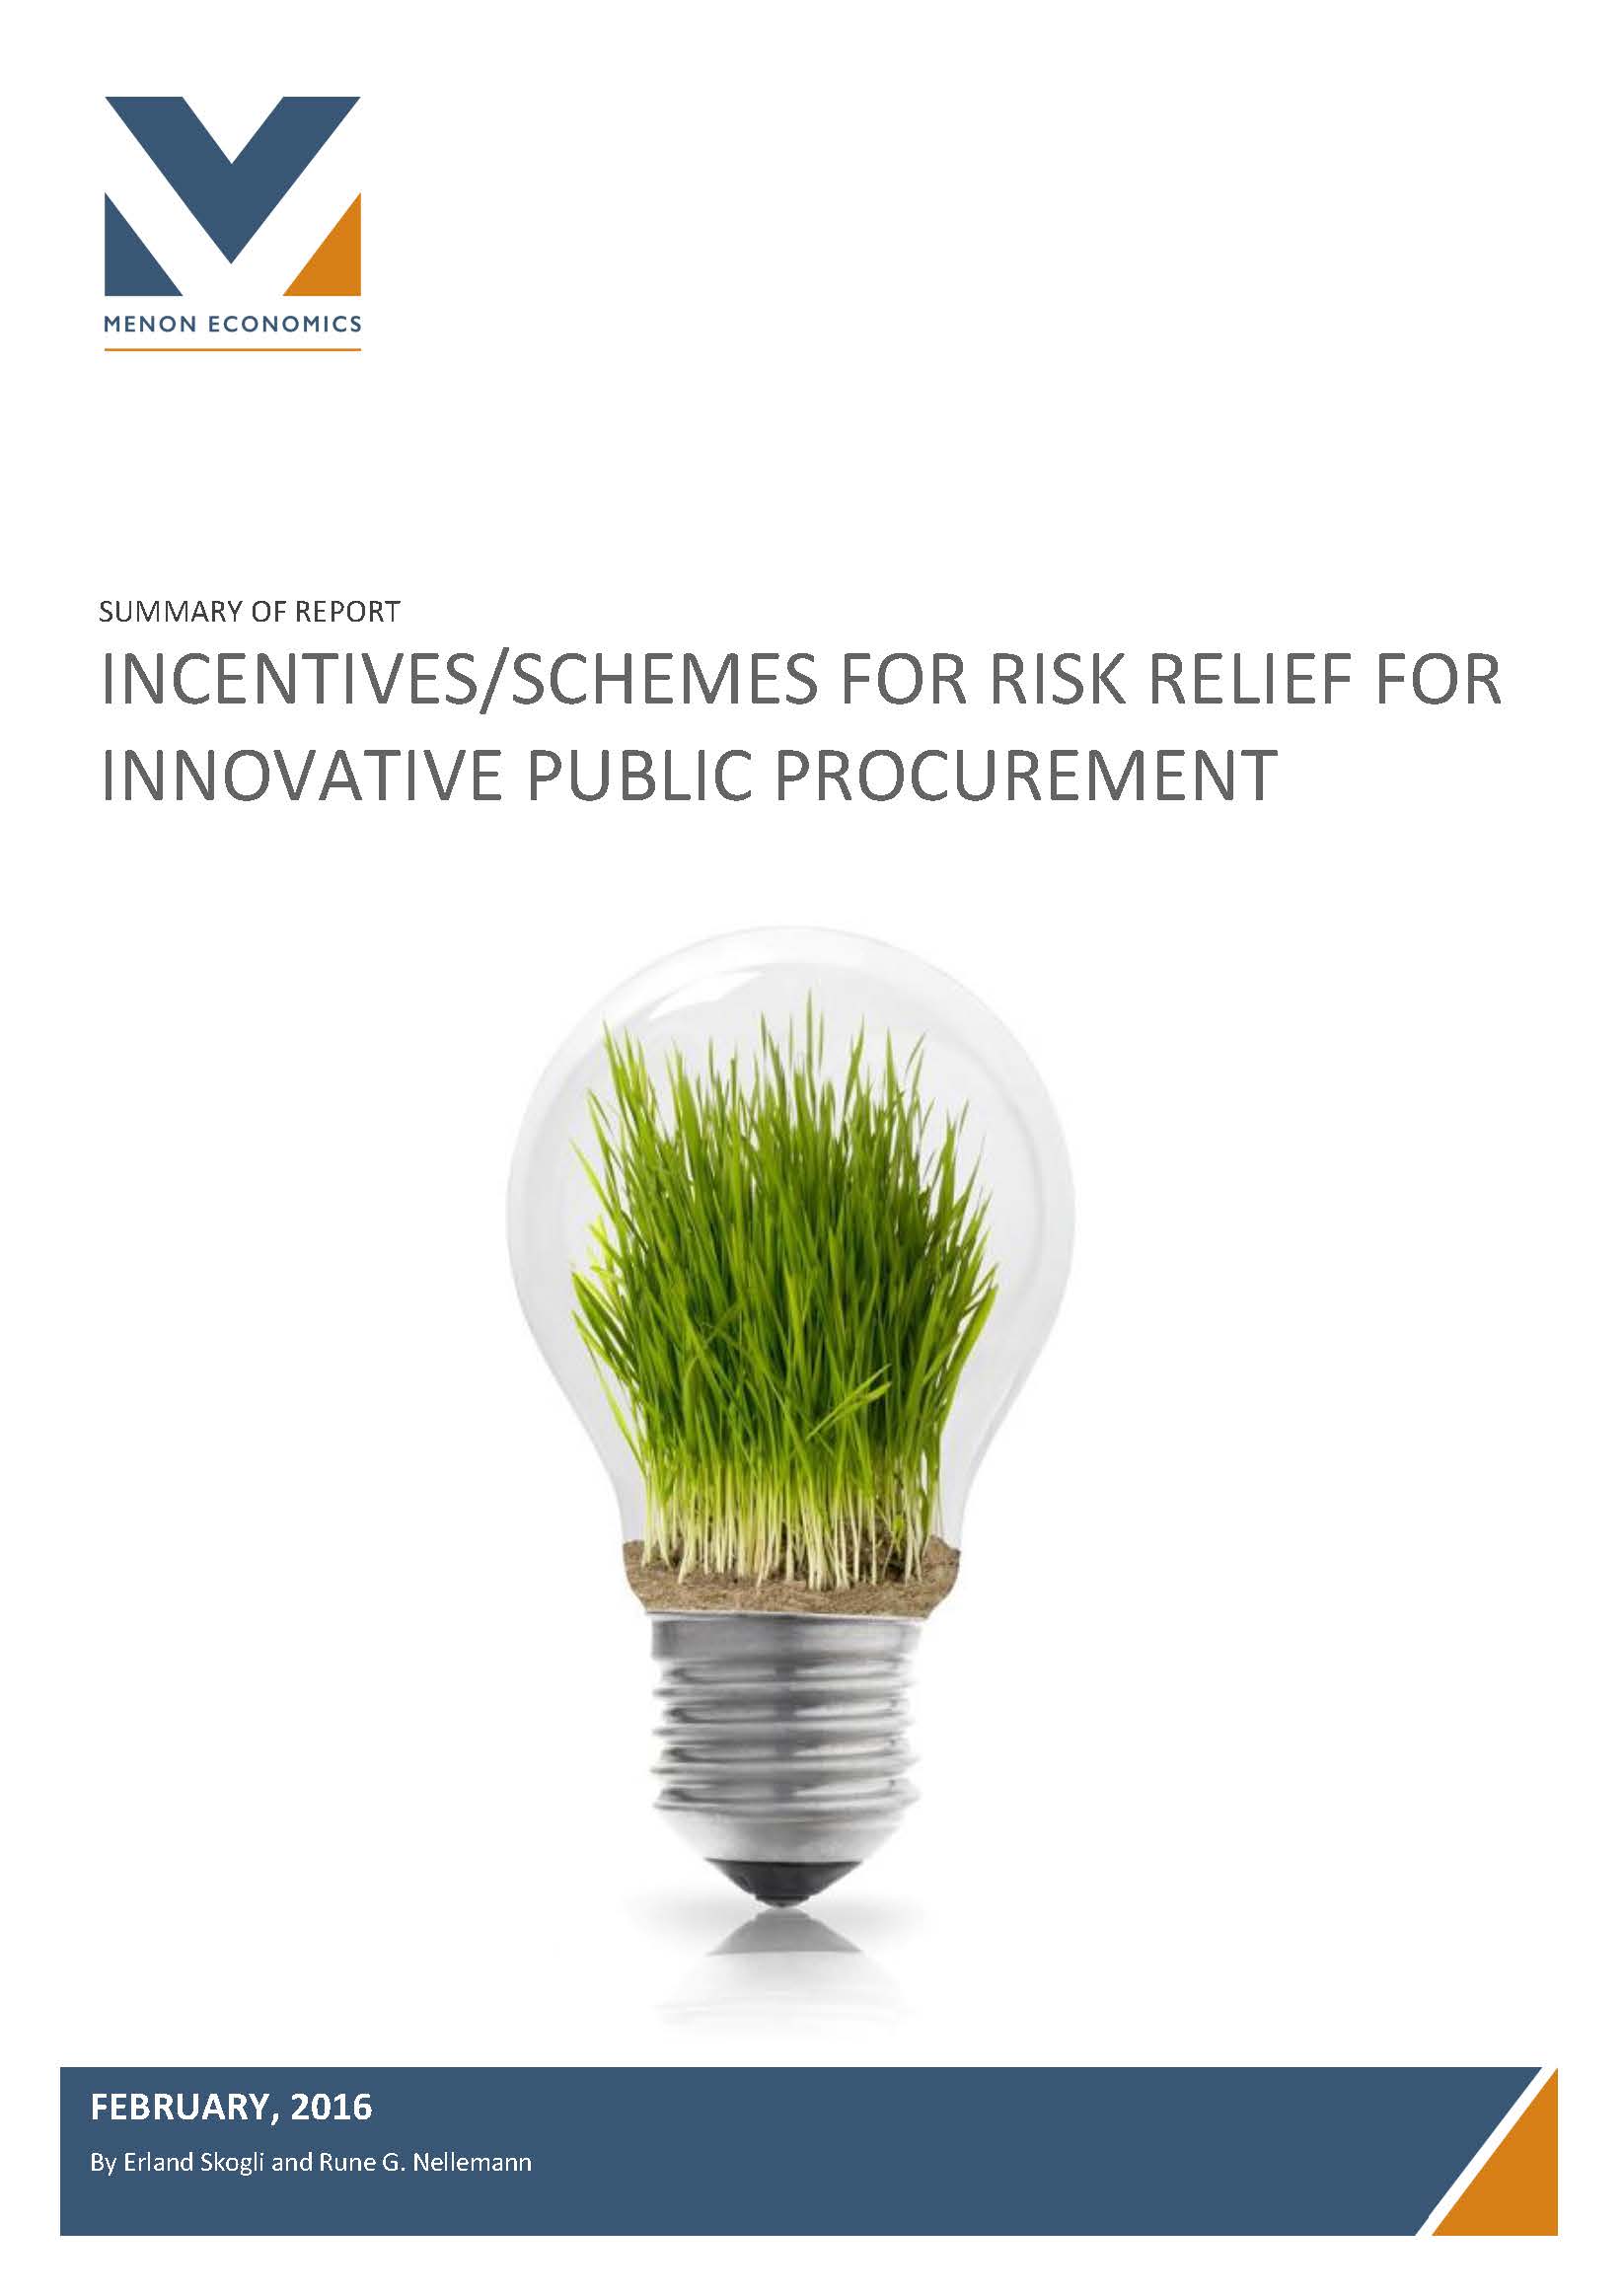 Report summary – Incentives/schemes for risk relief for innovative public procurement